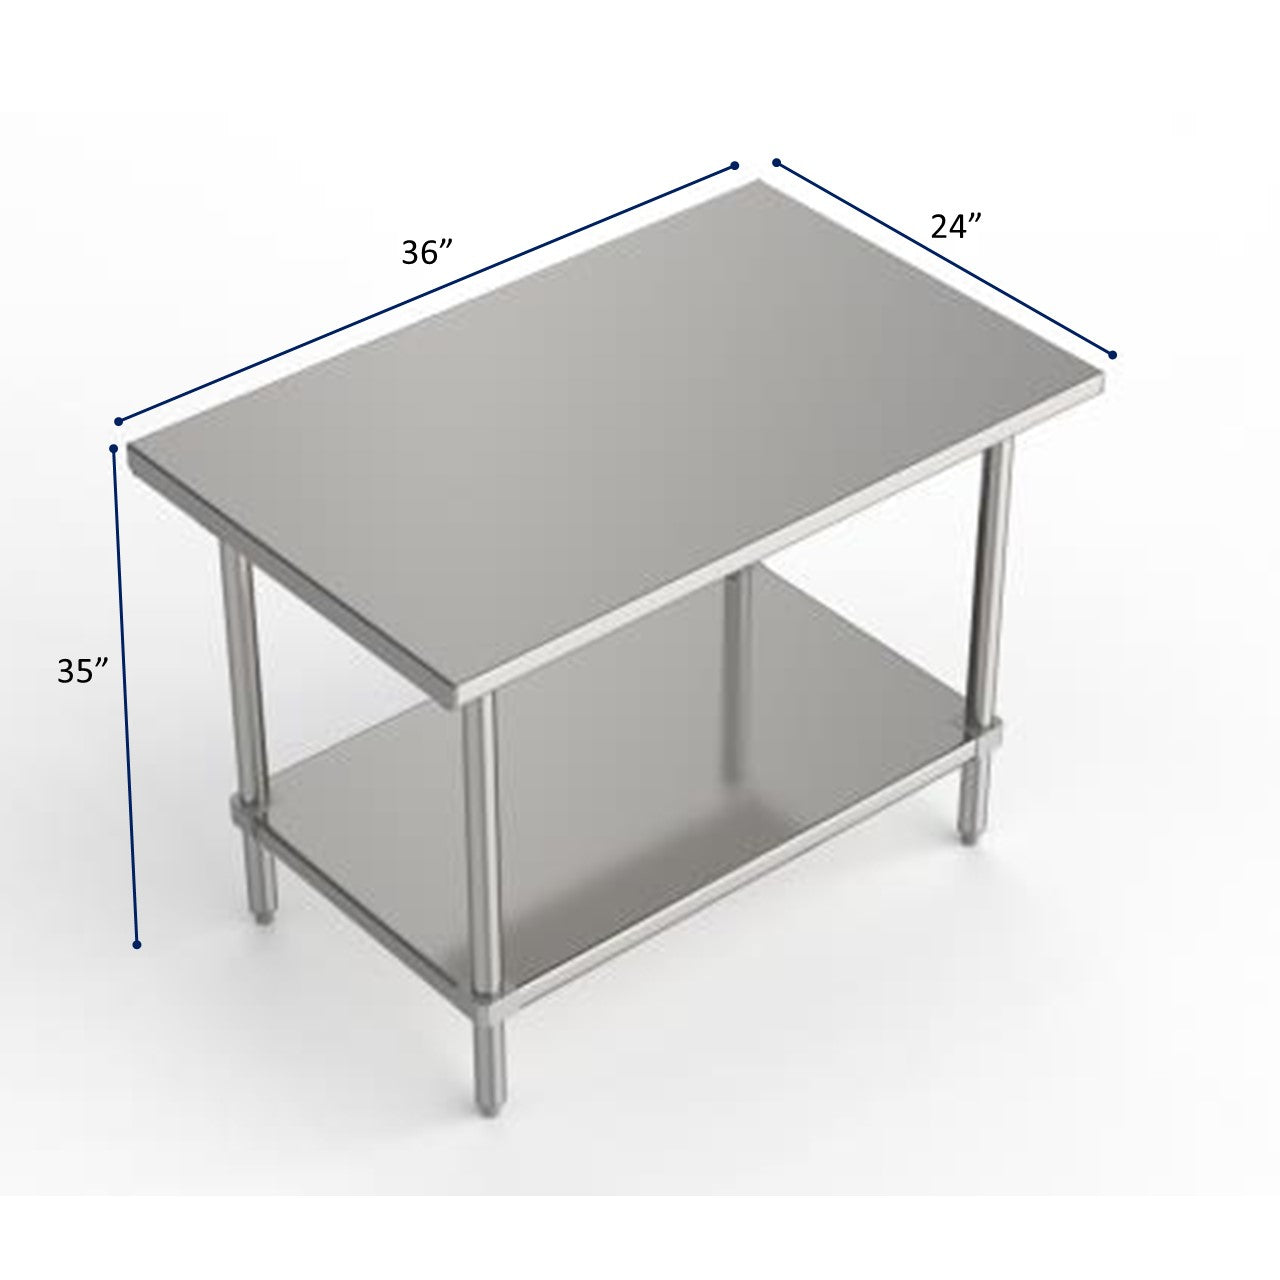 GSW Commercial Grade Flat Top Work Table with Stainless Steel Top, Galvanized Undershelf & Legs, Adjustable Bullet Feet, Perfect for Restaurant, Home, Office, Kitchen or Garage, NSF Approved (24"D x 36"L x 35"H)